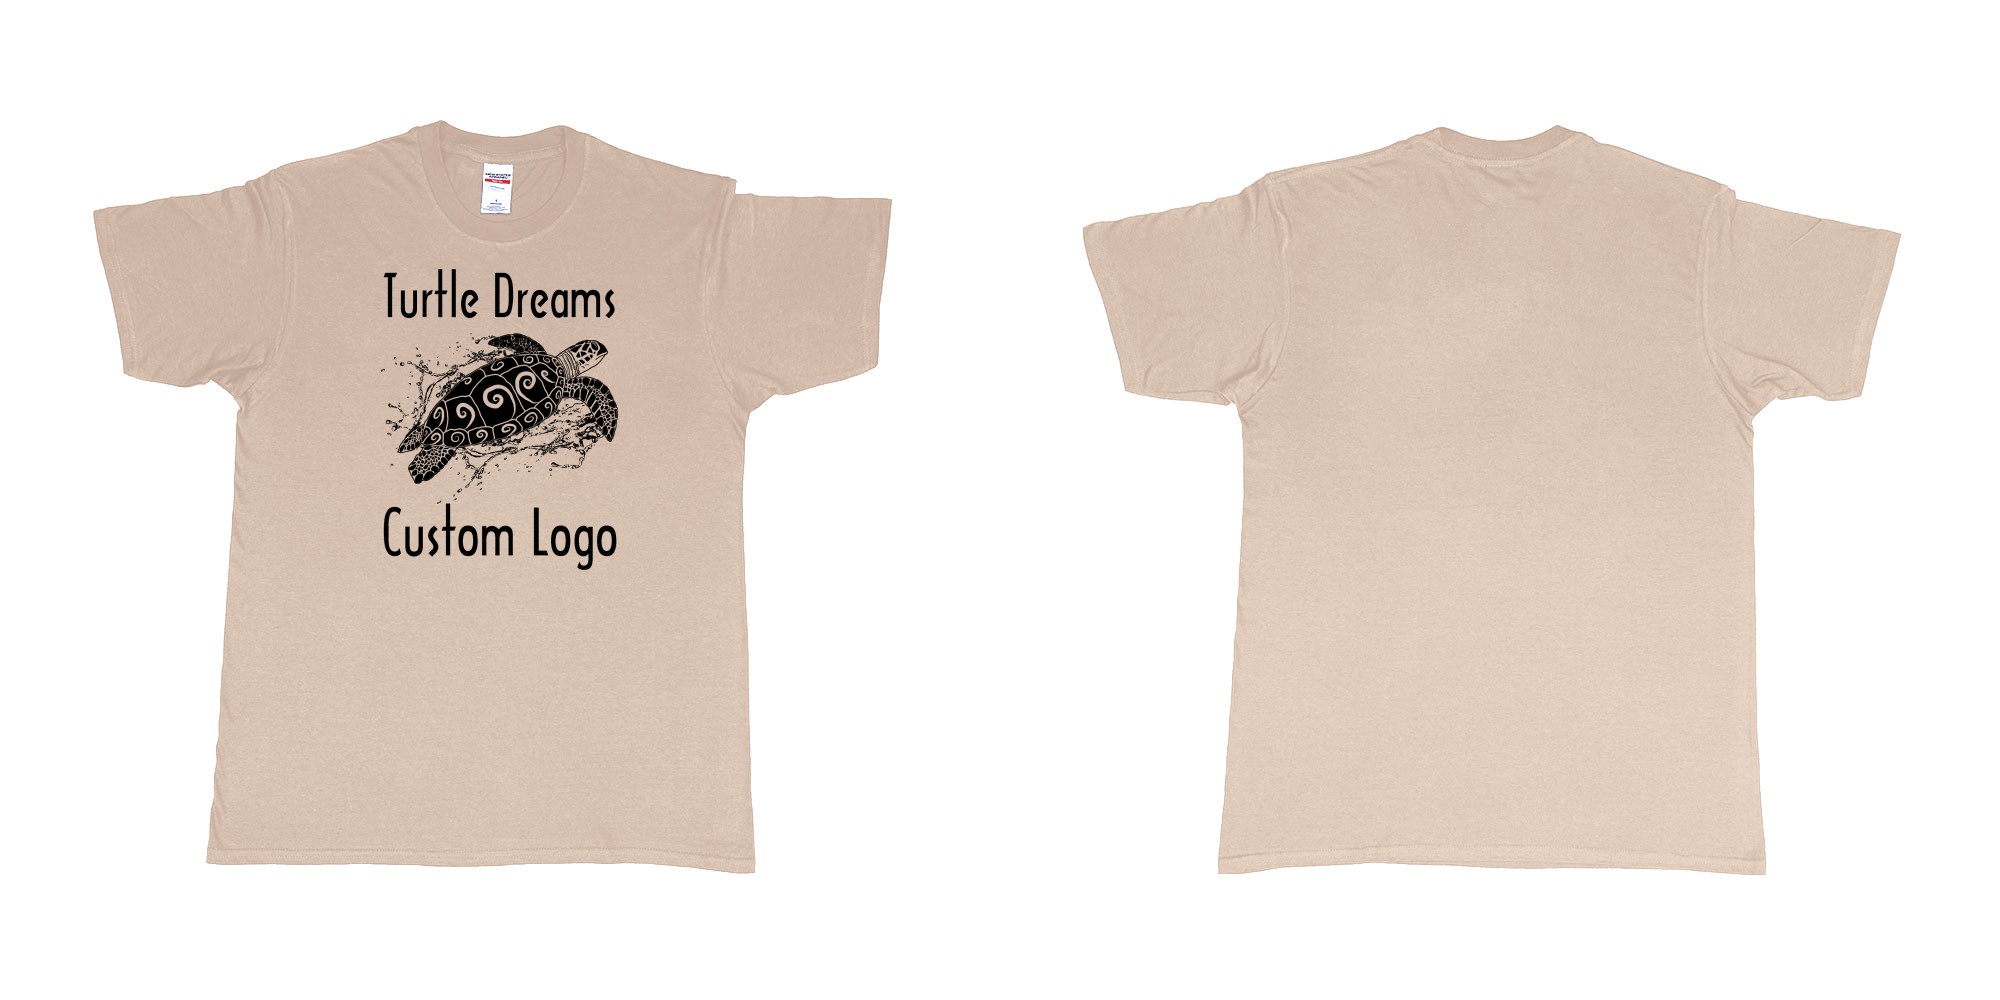 Custom tshirt design turtle dreams custom logo design in fabric color sand choice your own text made in Bali by The Pirate Way